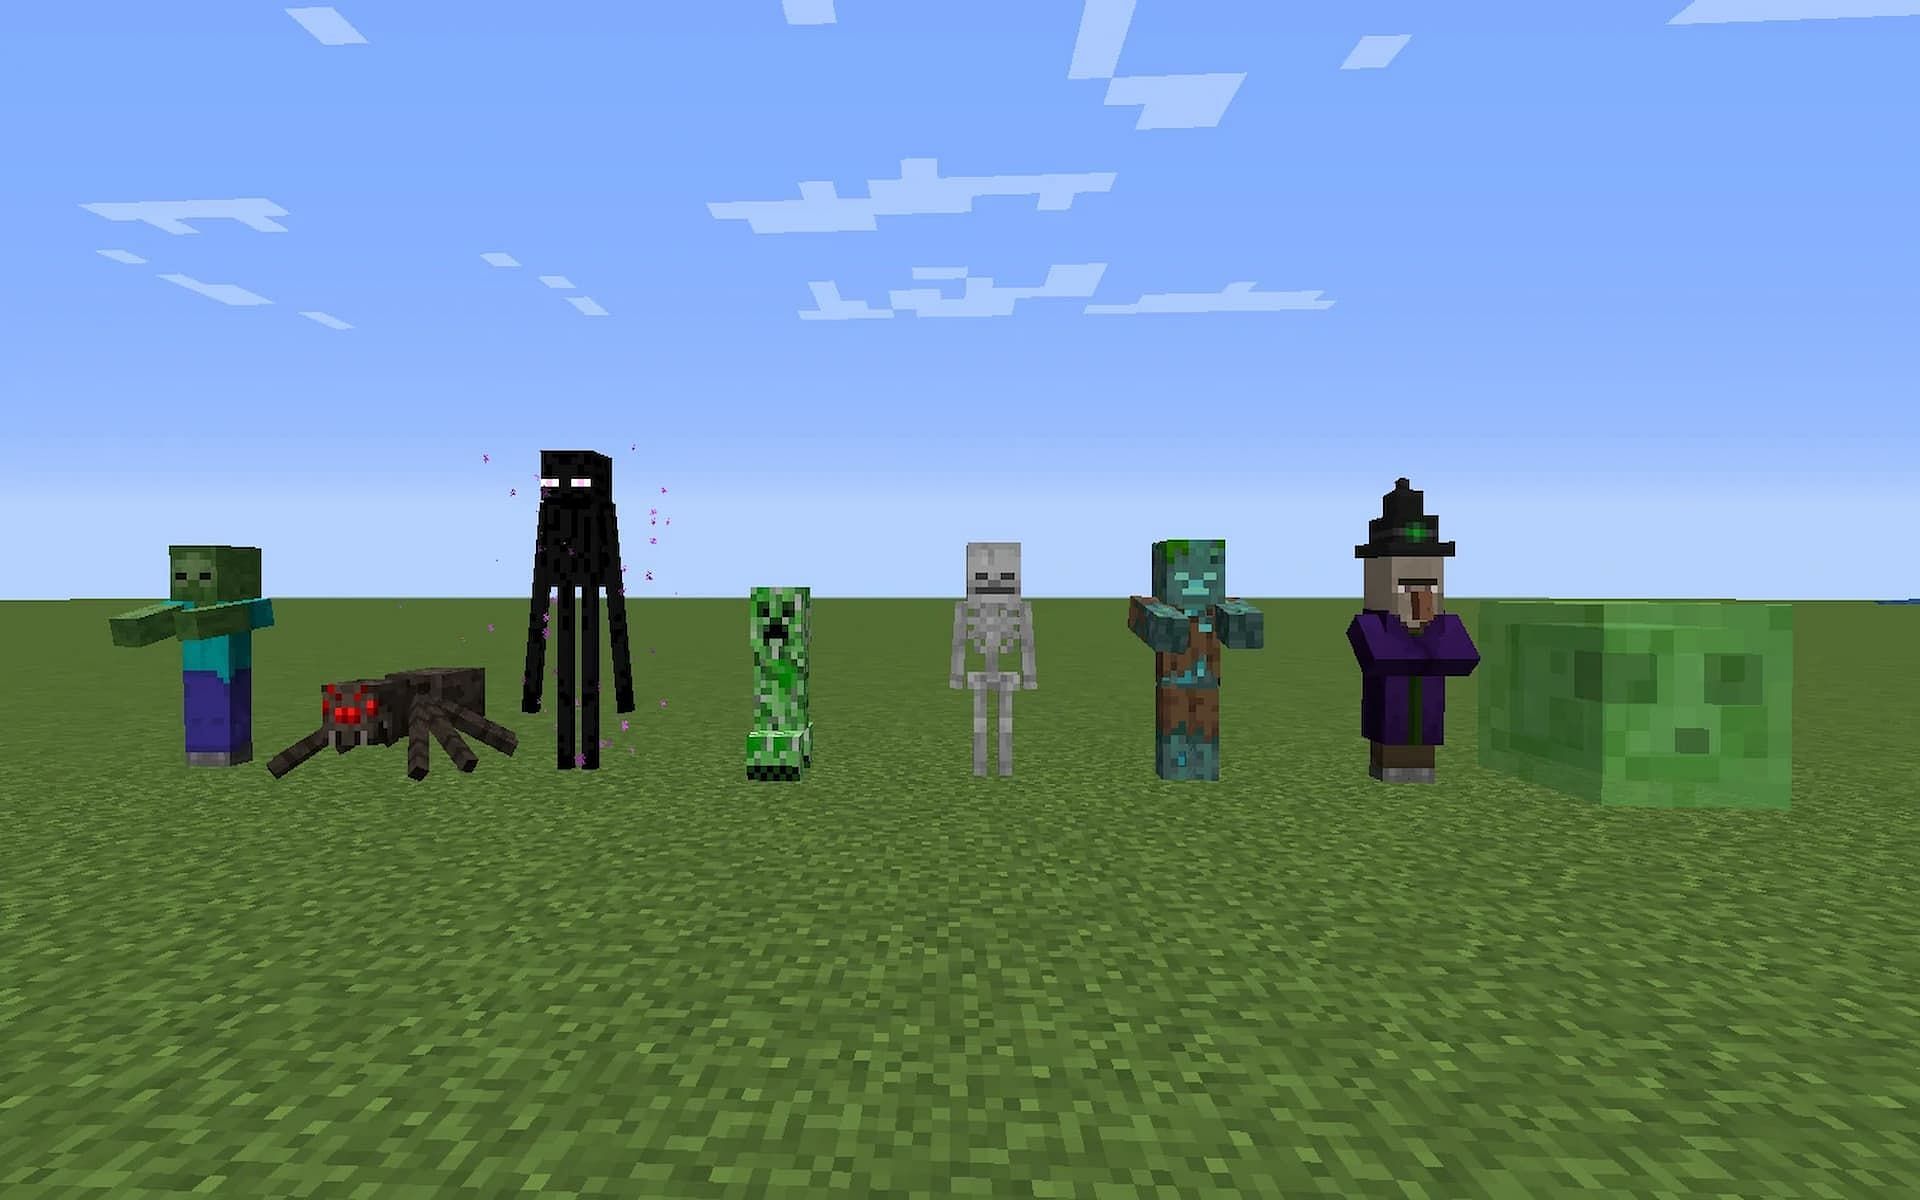 Players can find lots of benefits with the various mobs in game (Image via Minecraft.Fandom.com)